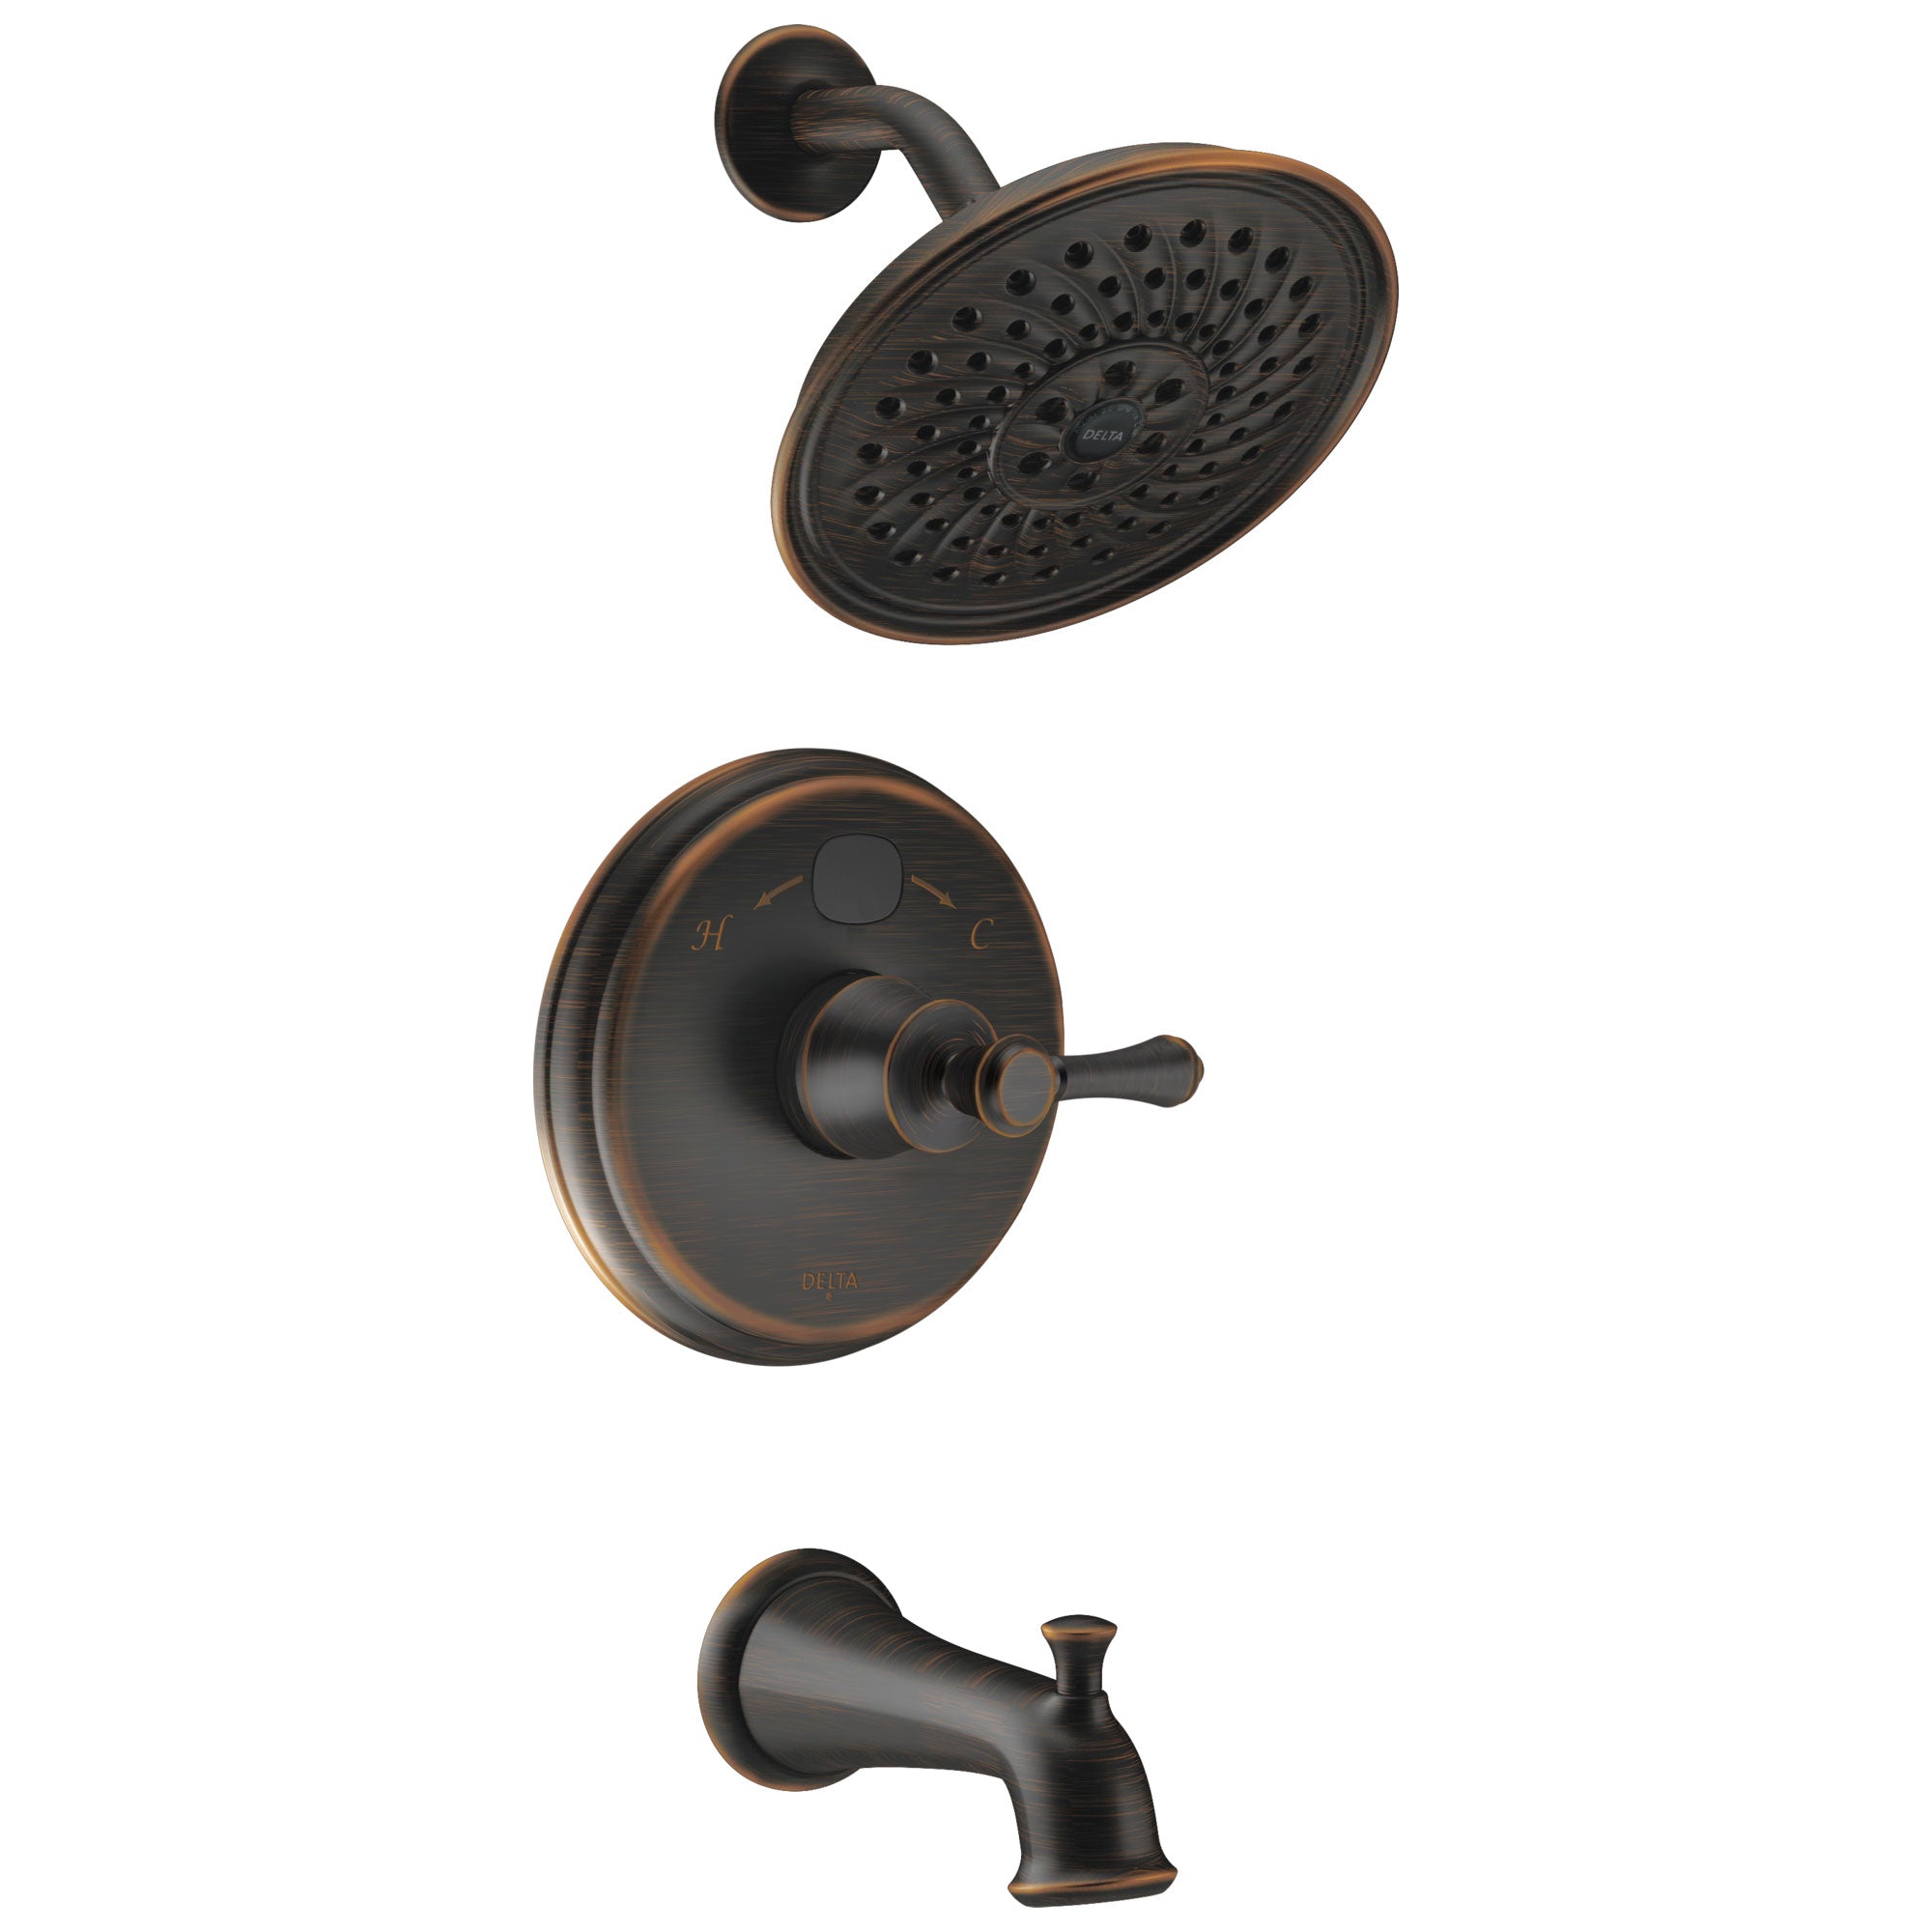 Delta Venetian Bronze Traditional 14 Series Digital Display Temp2O One Handle Tub and Shower Combination Faucet Includes Trim Kit and Valve without Stops D2020V